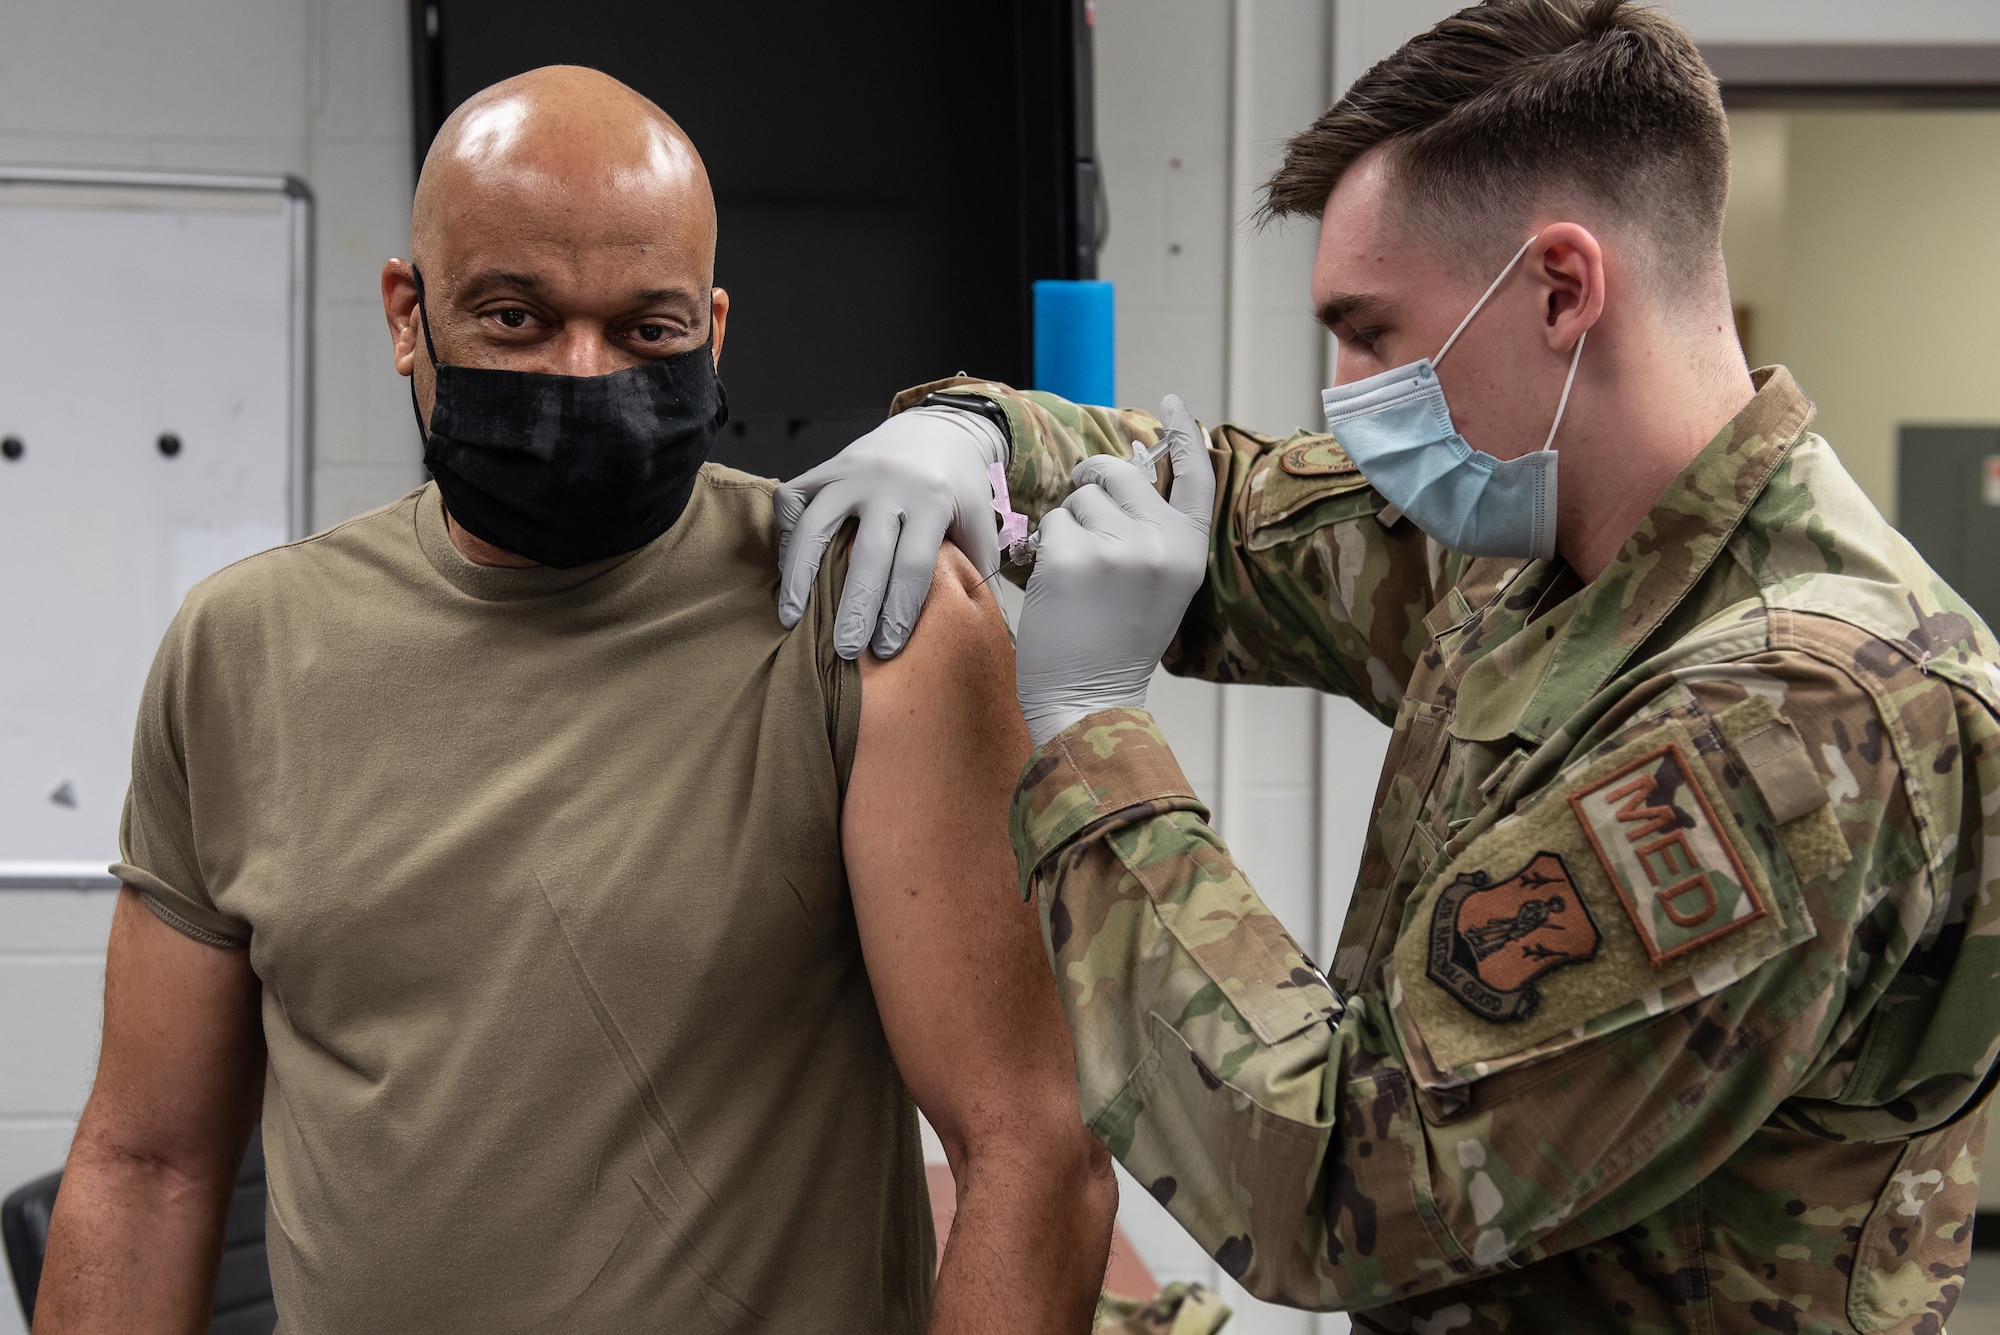 COVID vaccinations underway for military members at 123rd Airlift Wing >  Nellis Air Force Base > News